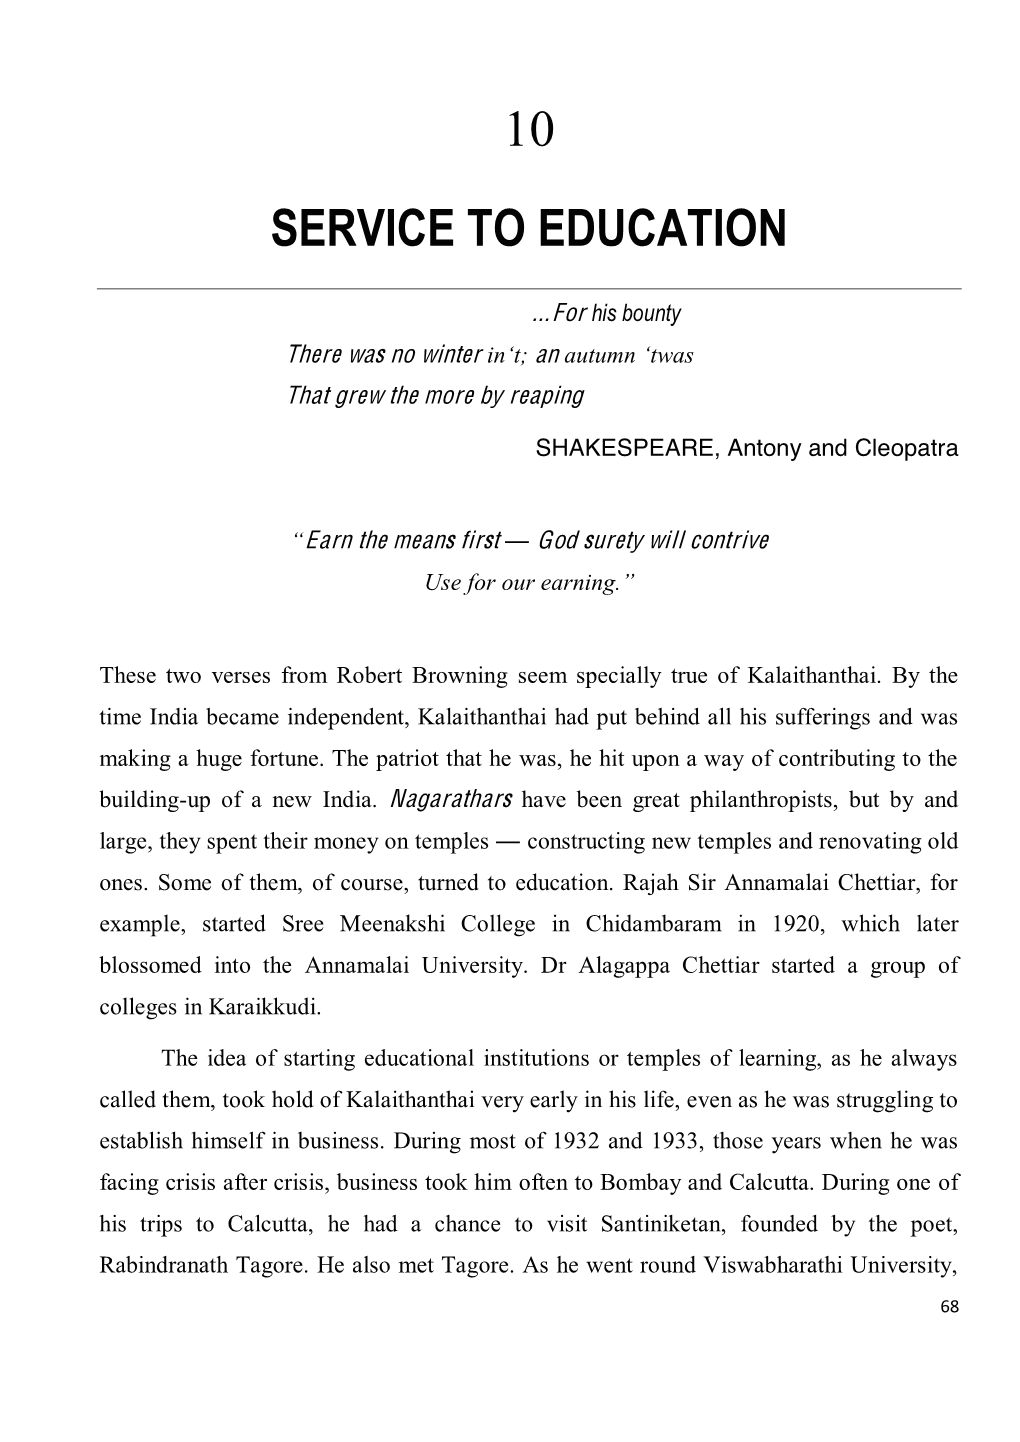 10 Service to Education